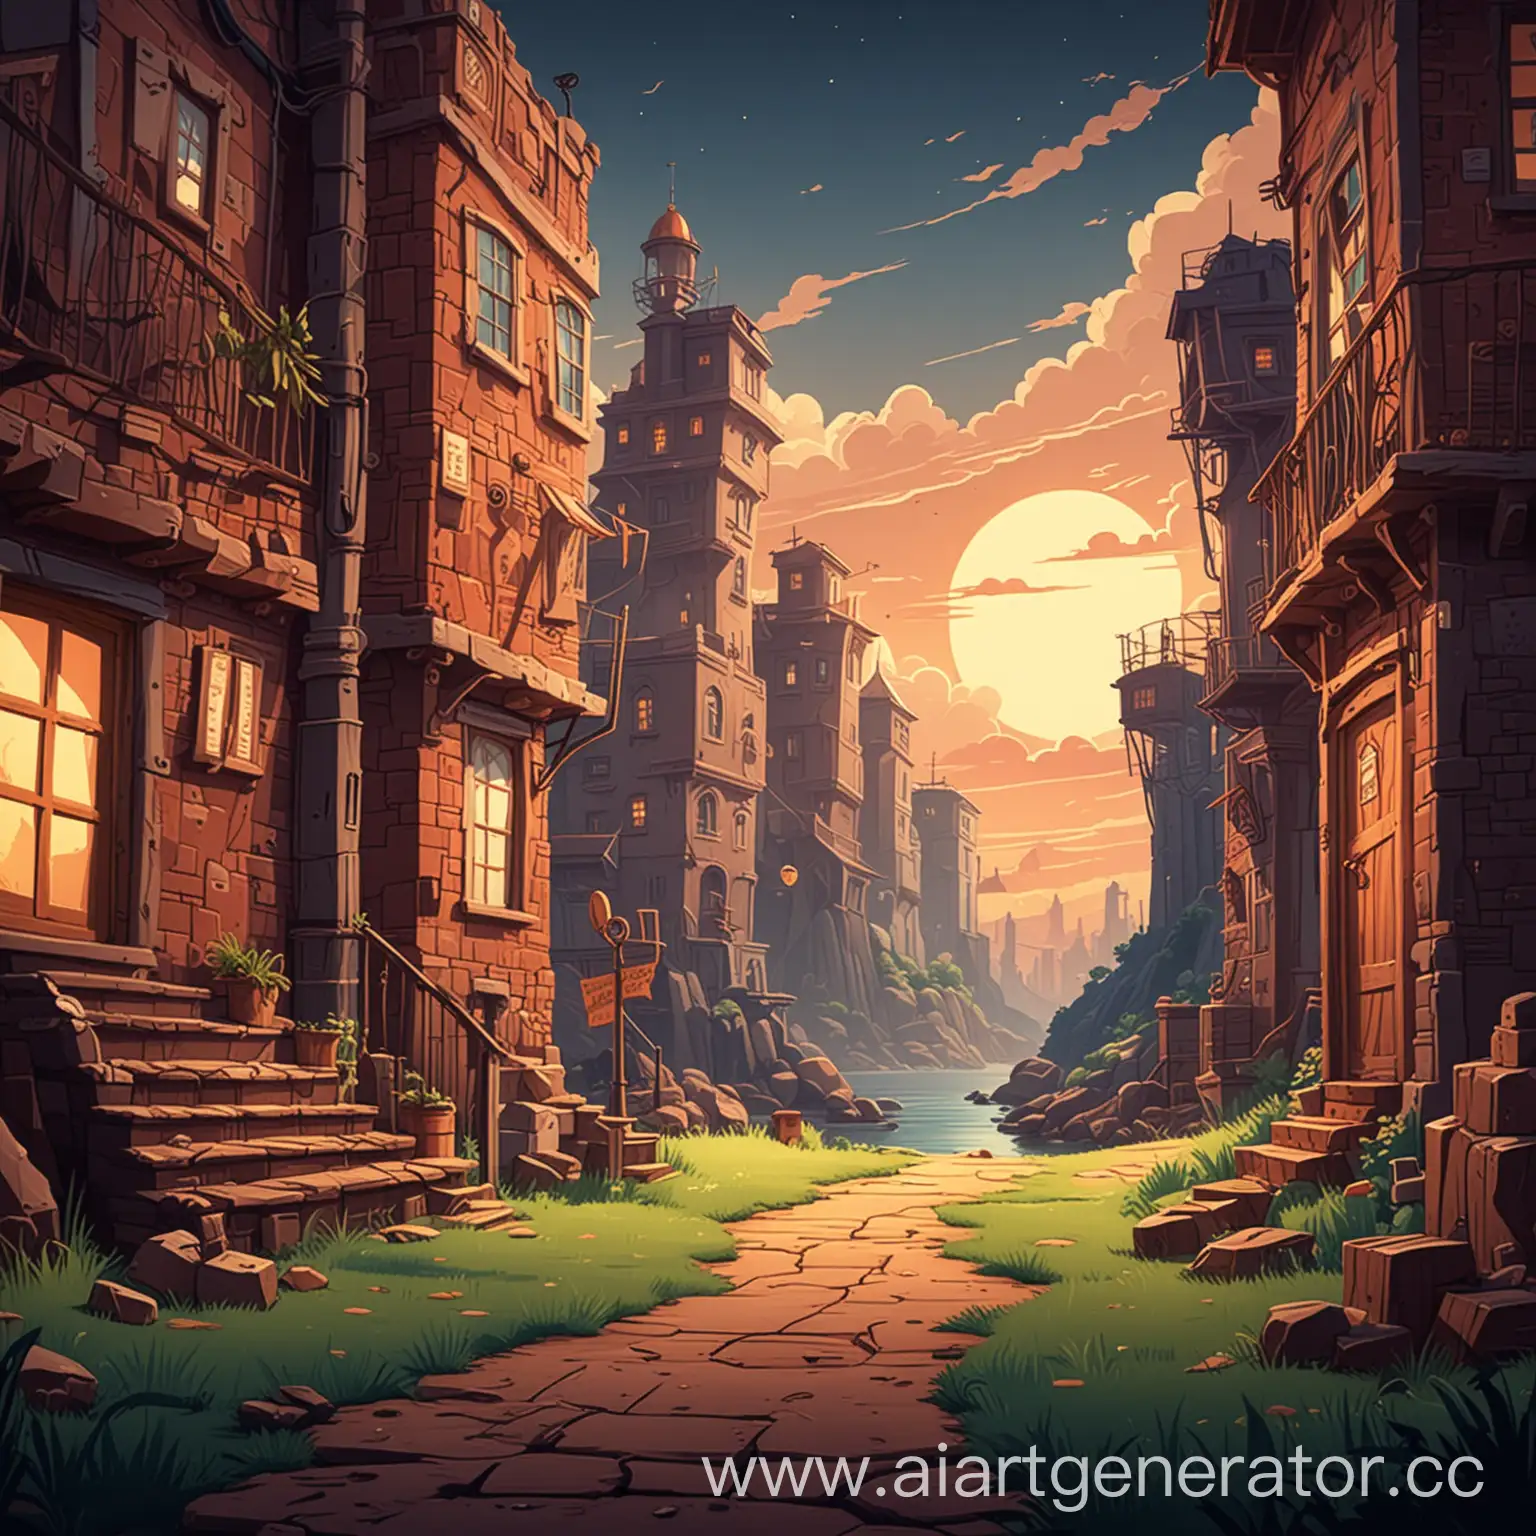 background picture for a 2D game in the style of the 30s cartoons